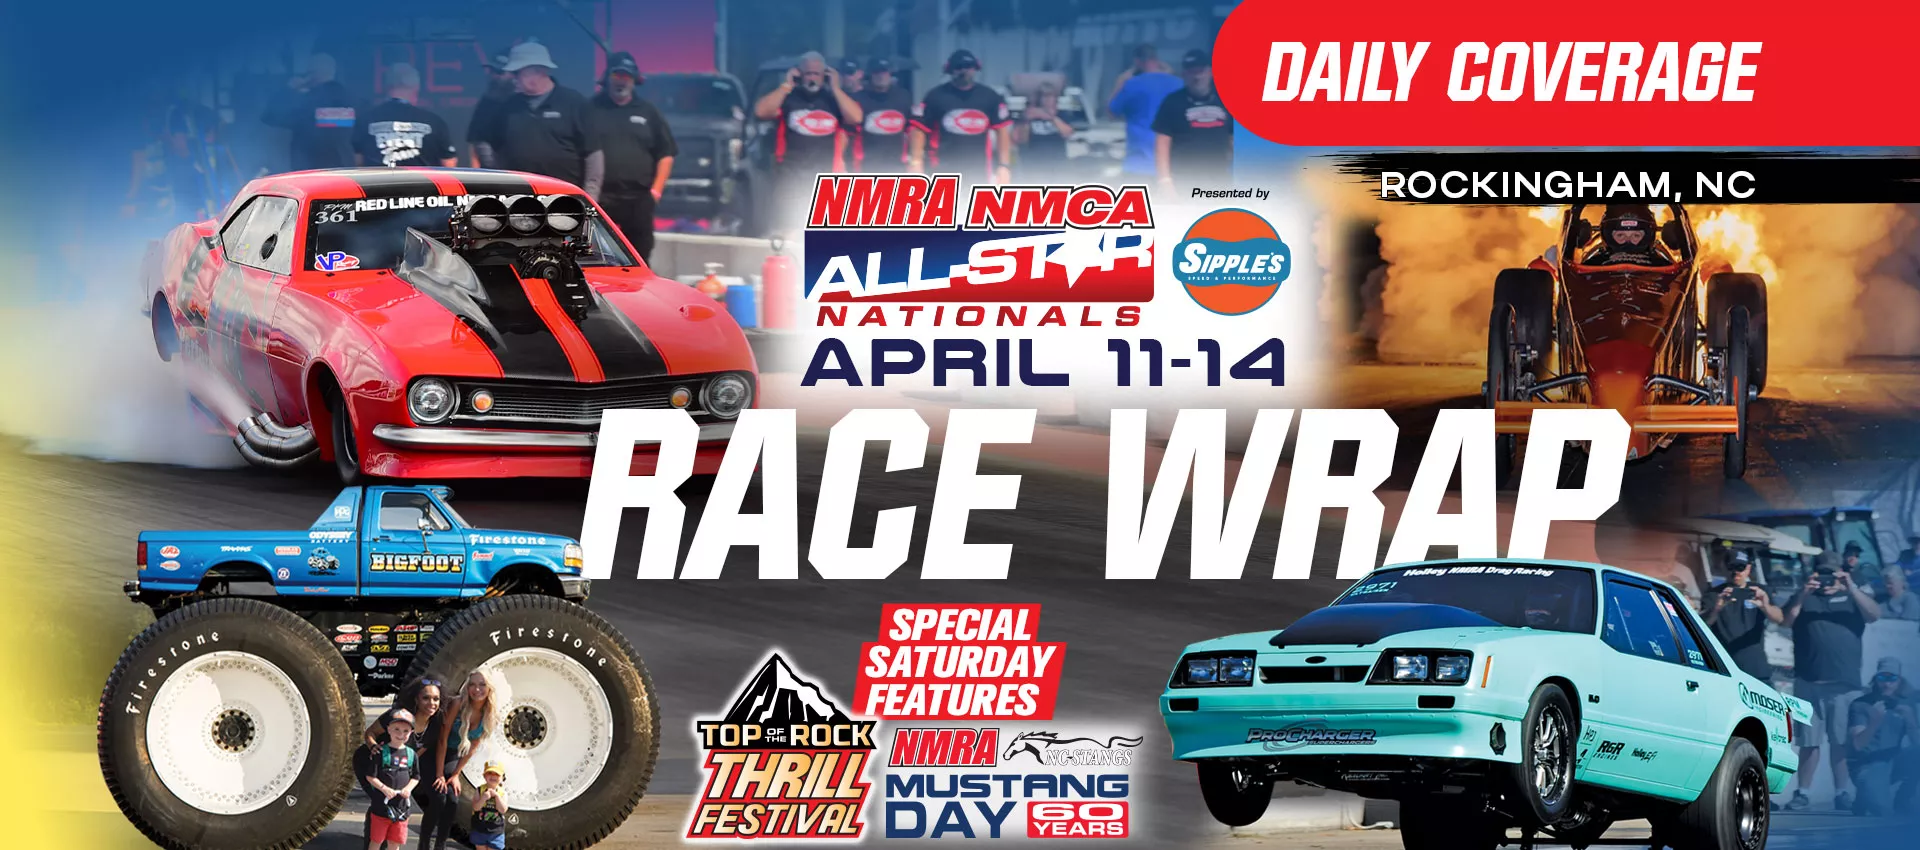 Race Wrap | NMRA/NMCA All-Star Nationals